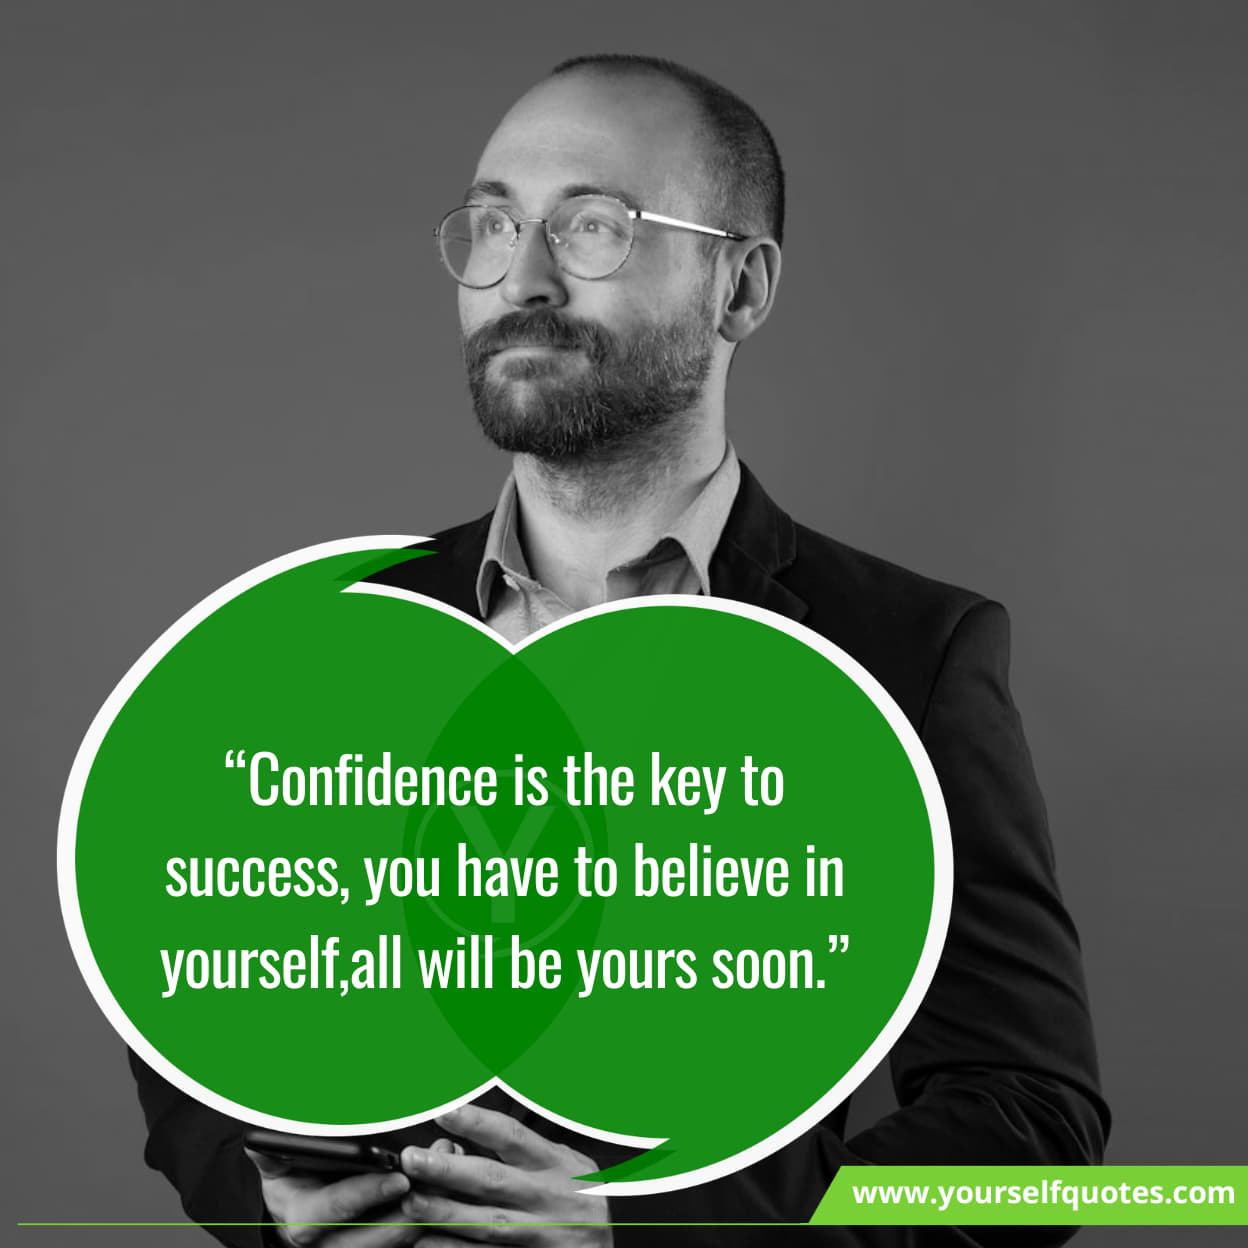 Self - Confidence Messages Quotes For Confidence For Life